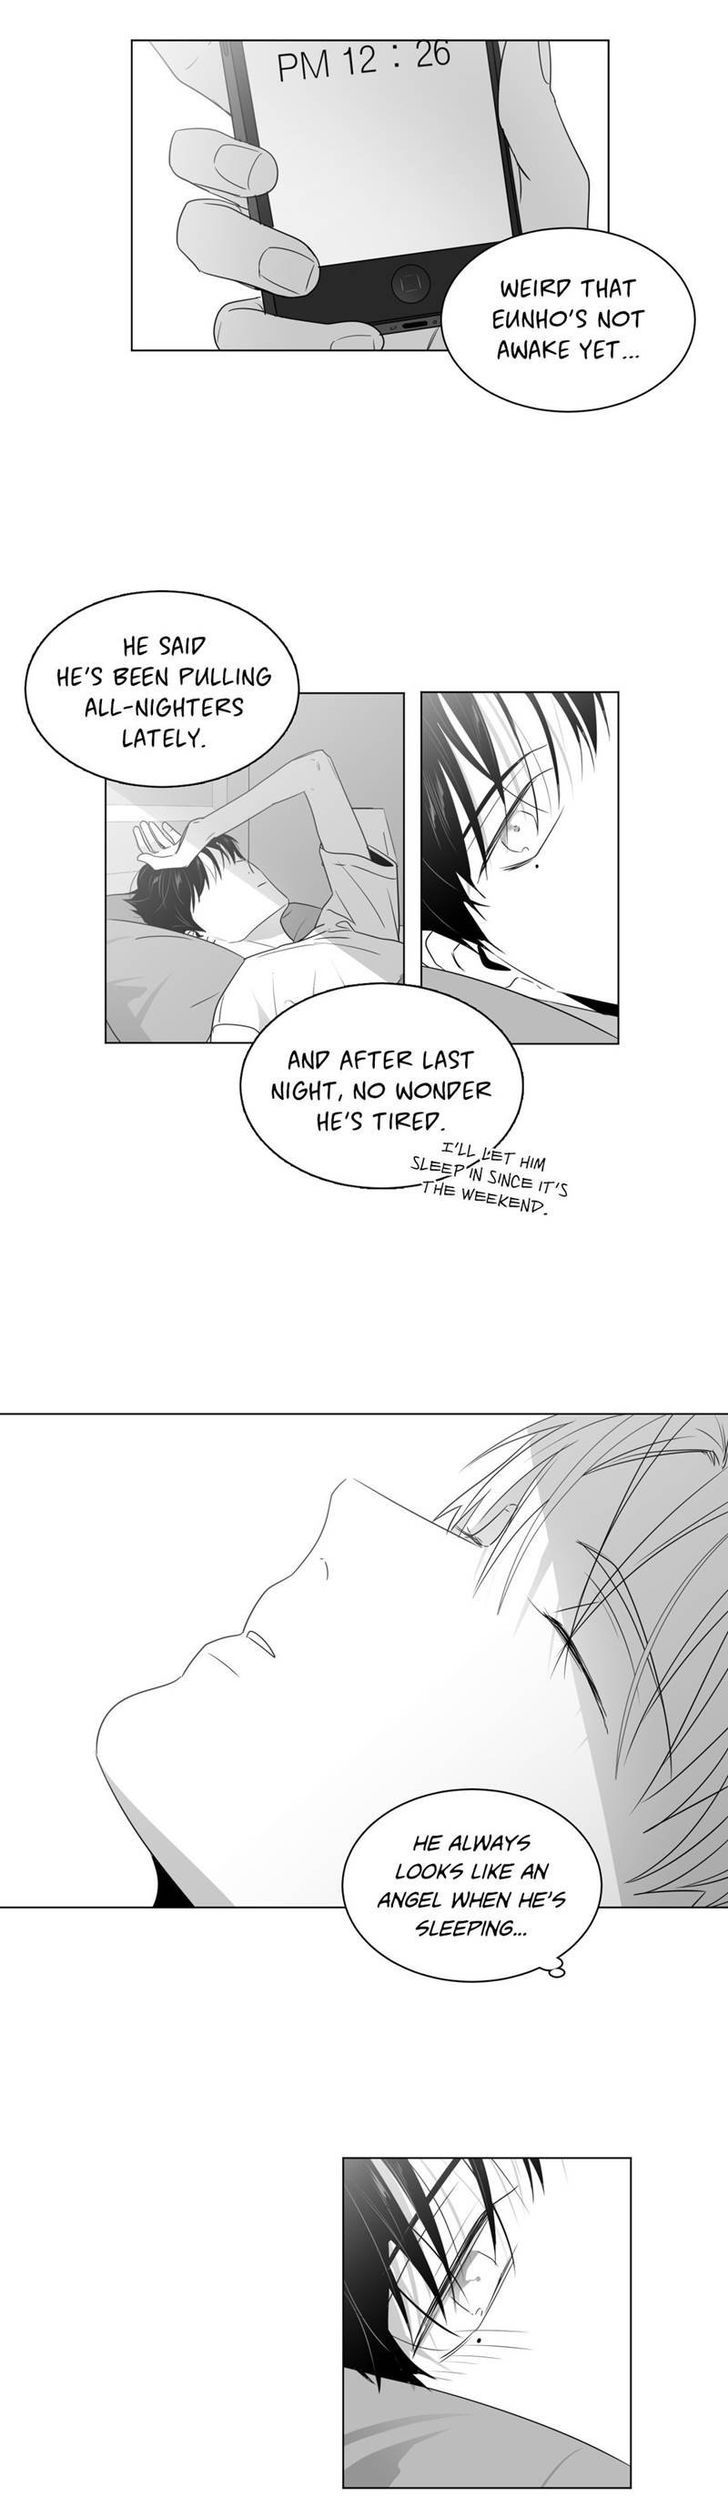 Lover Boy (Lezhin) Chapter 041 page 2